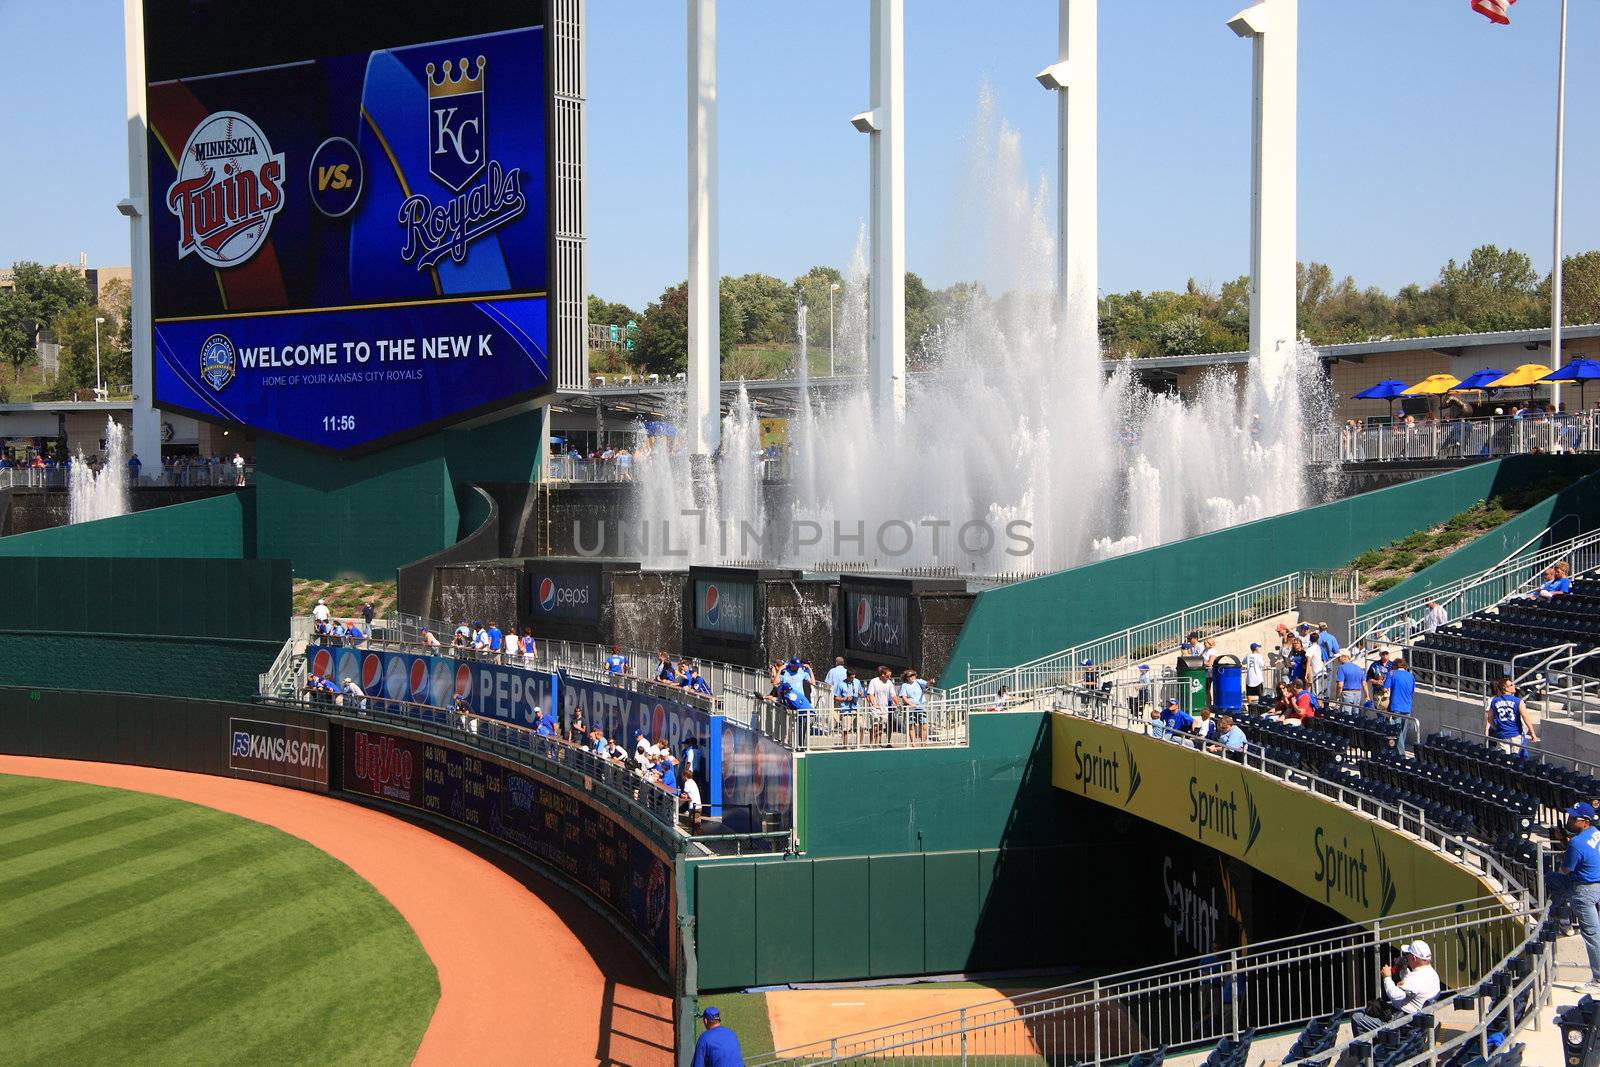 Vintage scoreboard and fountains surrounded by fans at recently remodeled Big K